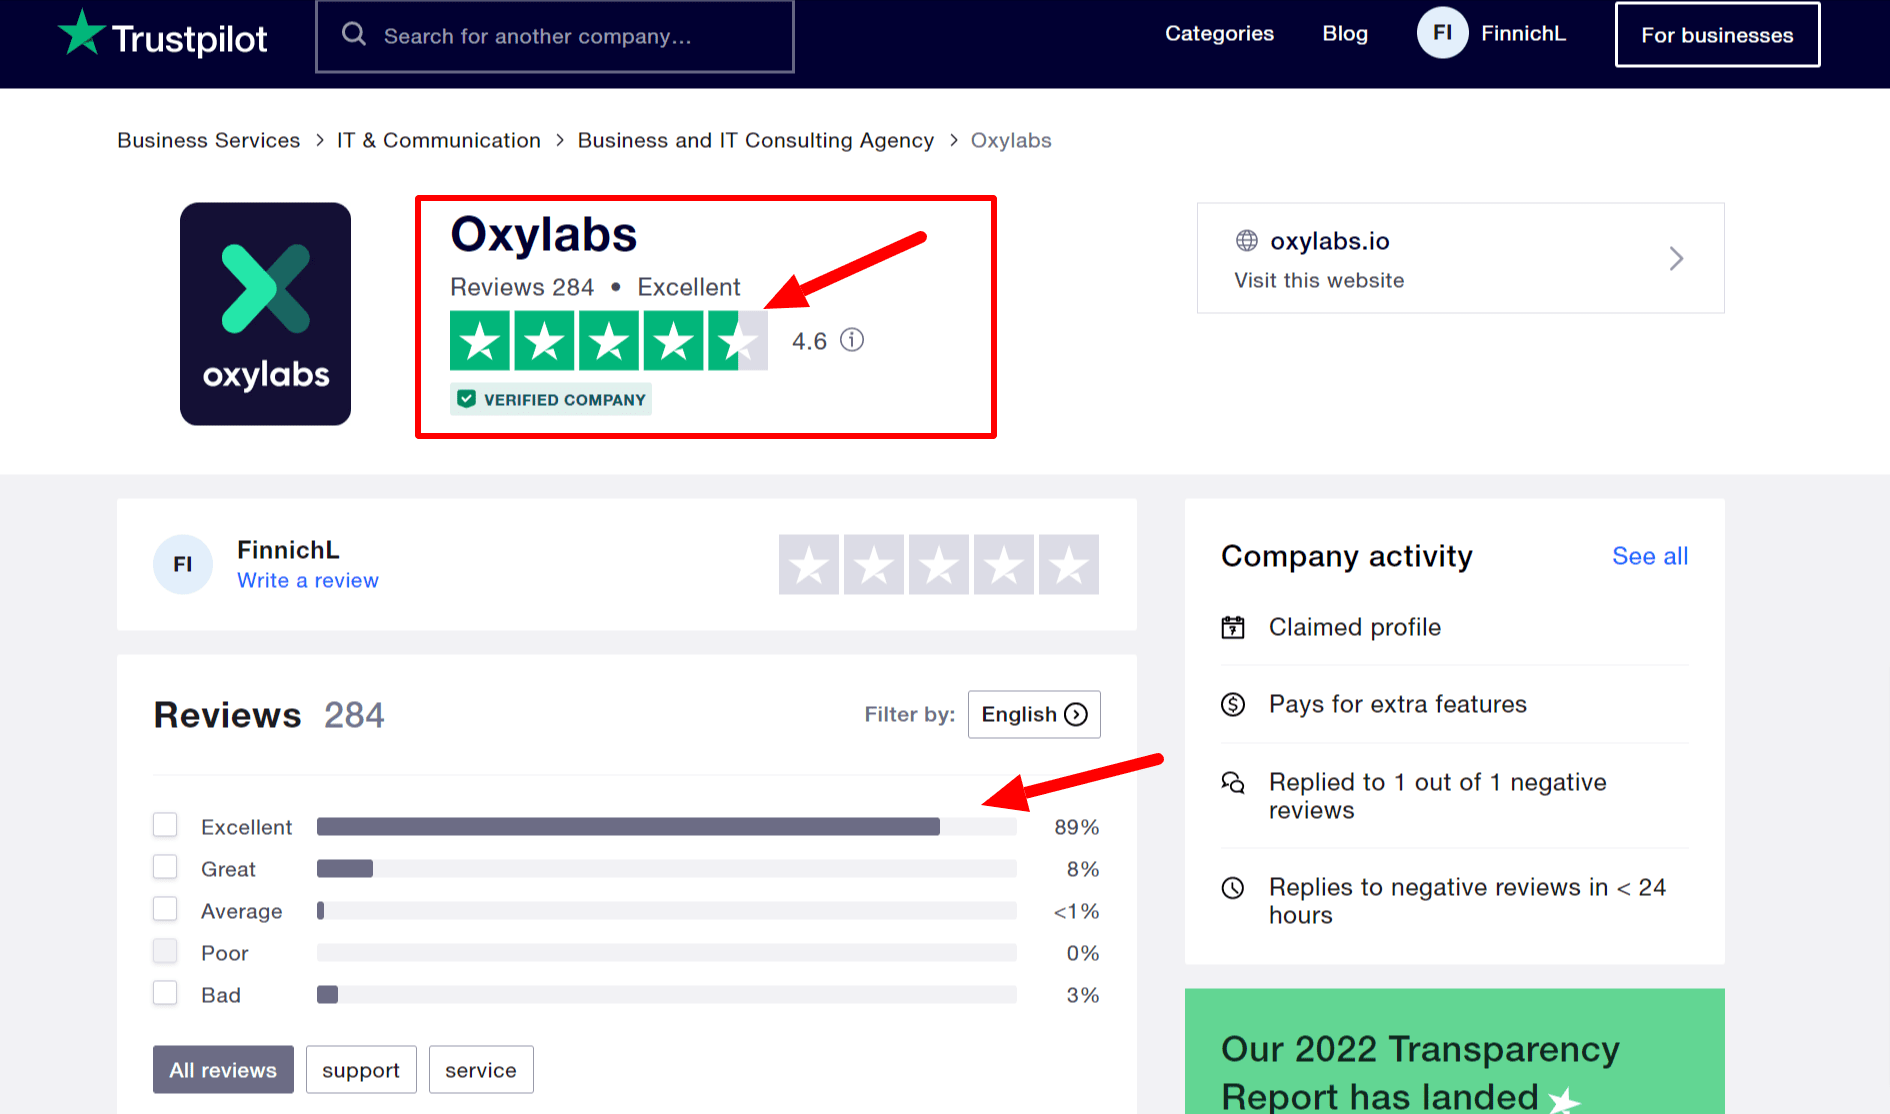 Oxylabs Reviews Read Customer Service Reviews of oxylabs.io